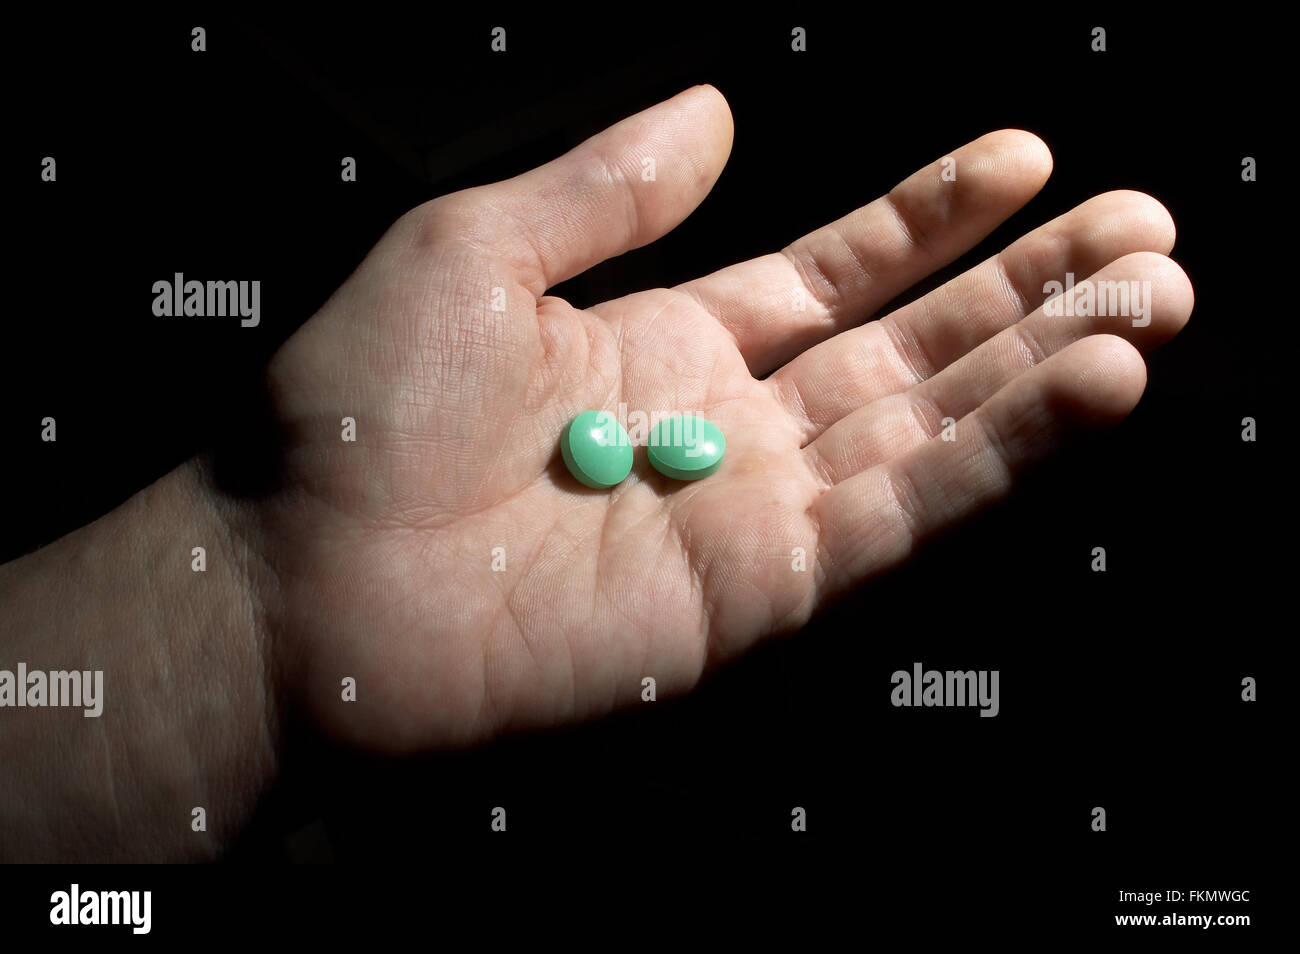 Two green tablets on the opened palm Stock Photo